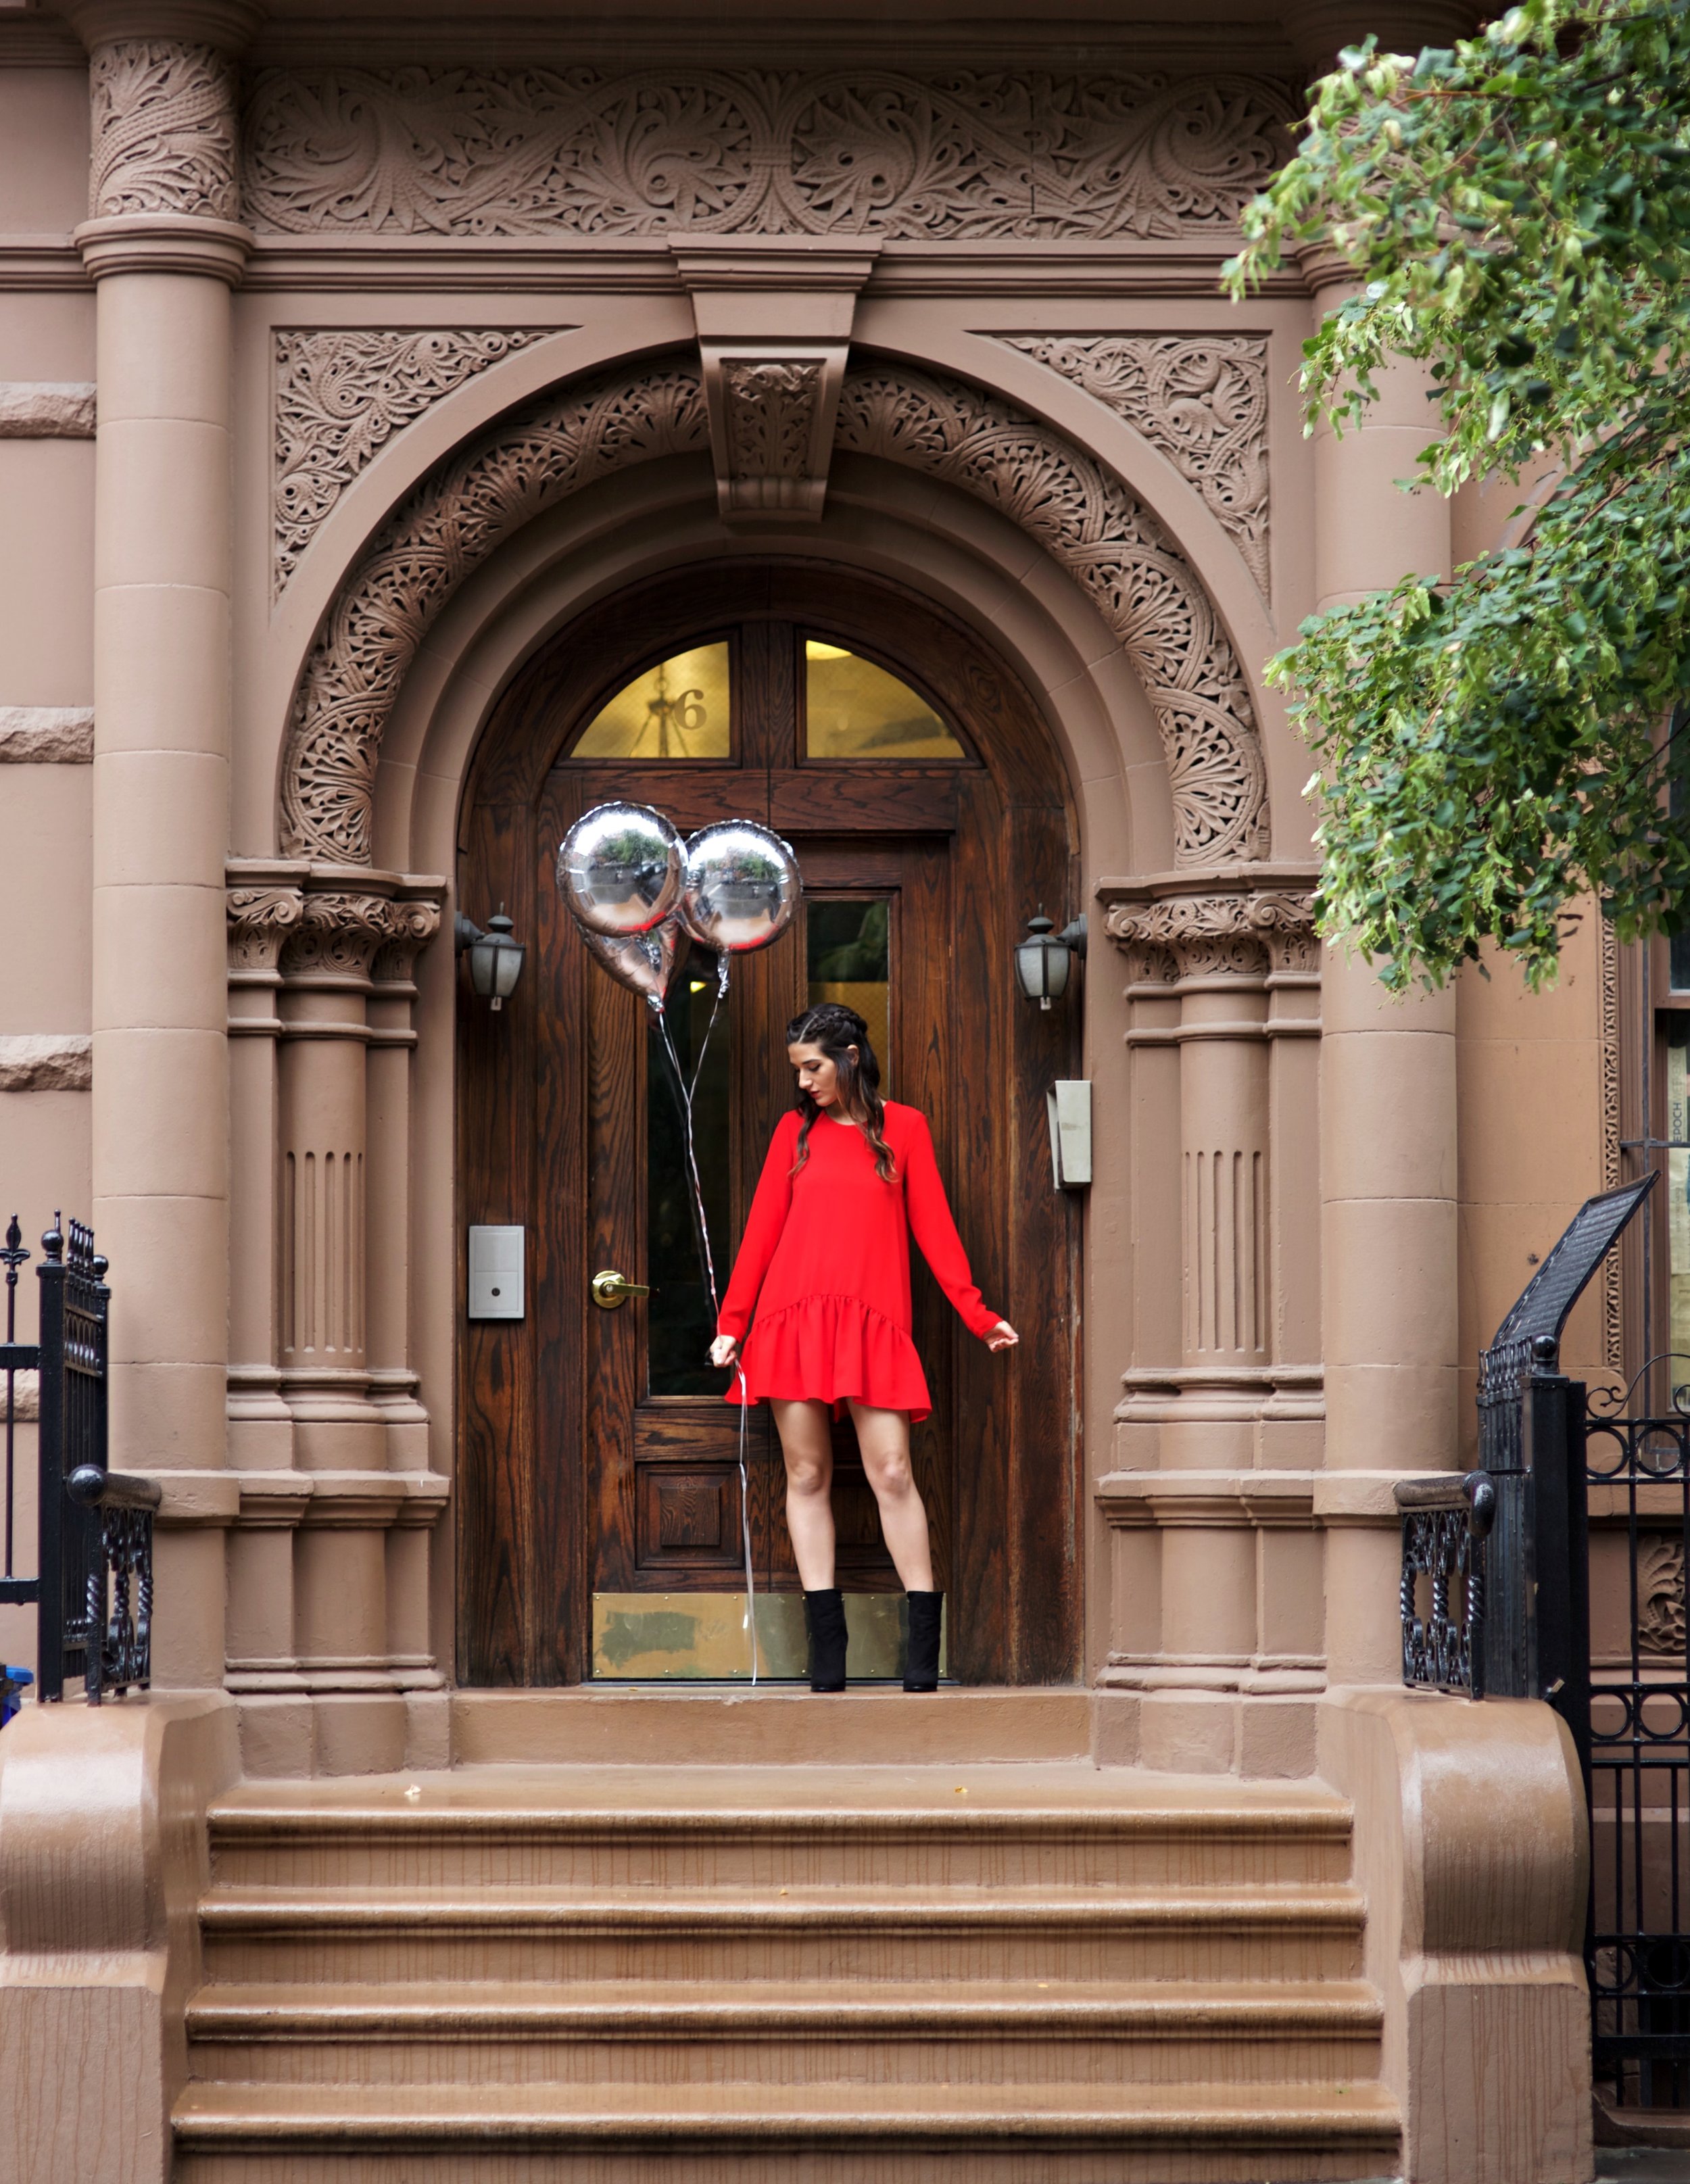 My Birthday Look Red Romper Black Booties Louboutins & Love Fashion Blog NYC Street Style Blogger Esther Santer M4D3 Shoes Trendy Outfit Pretty Beautiful Look What To Wear Shop Silver Photoshoot Balloons Fun City Lifestyle Girl Women Dress Hair Braids.jpg